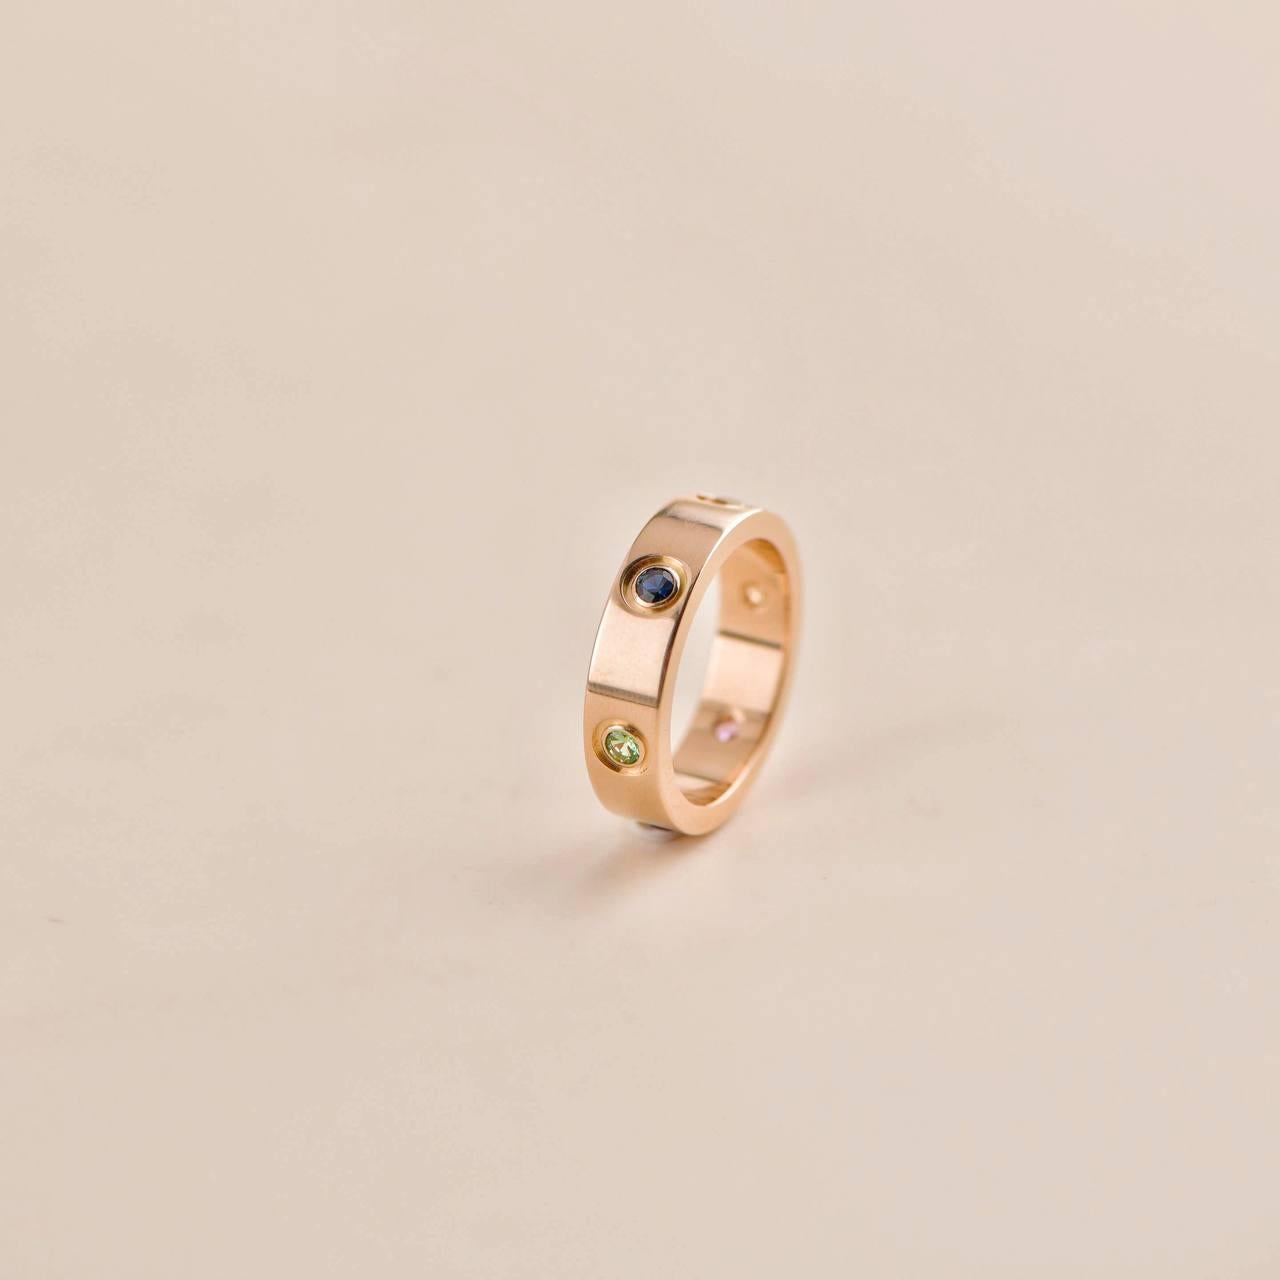 SKU	AT-2460
Comes With	Pouch Only
Date	2013
Model	B4087855
Serial Number	YO****
Metal	18k Rose Gold
Stones	Sapphire, Pink Sapphire, Amethyst, Yellow Sapphire, Green Garnet, Orange Garnet
Weight	9.1 g
Ring Size	55 
Condition	Excellent
Other Info	Size